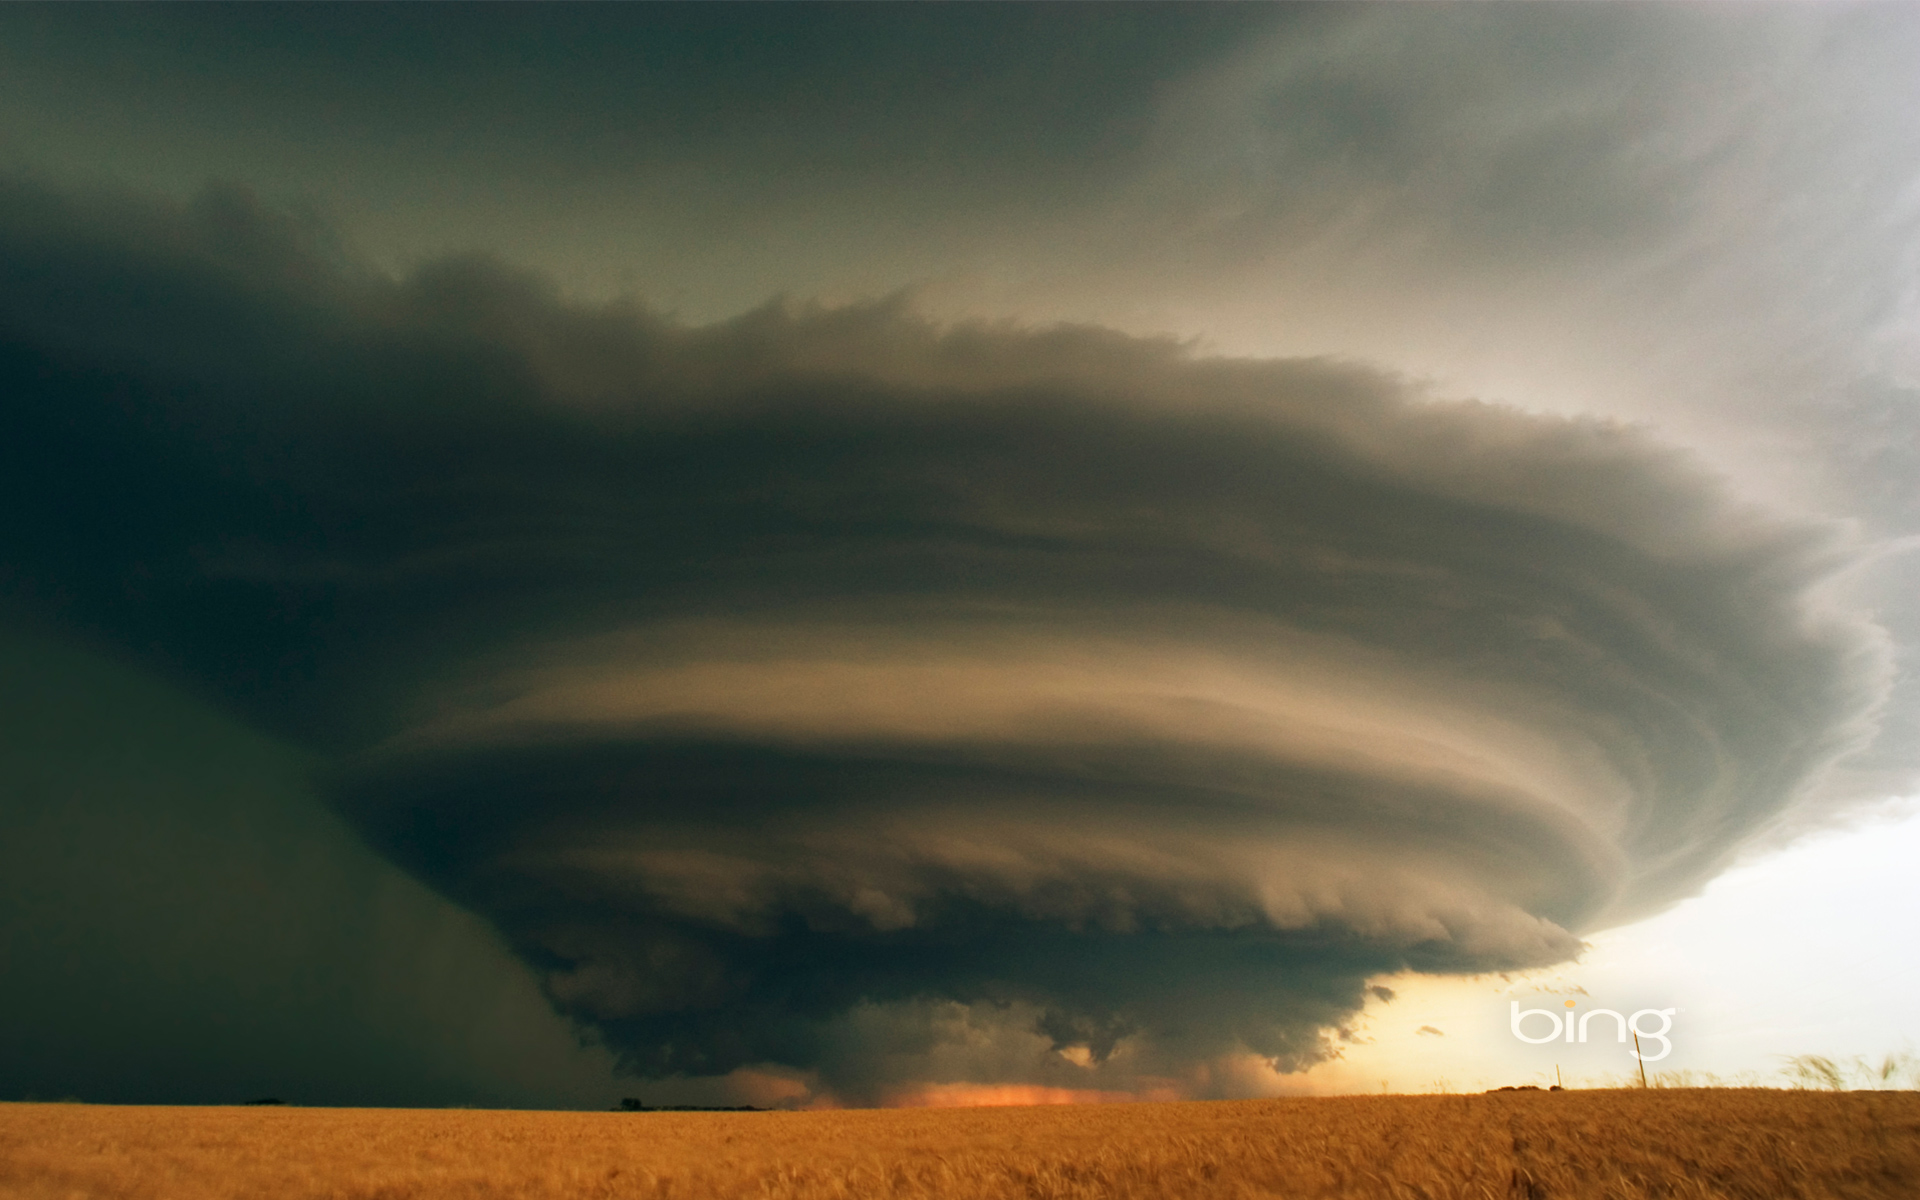 Photosky Wallpaper Bing Supercell Thunderstorm An Isolated